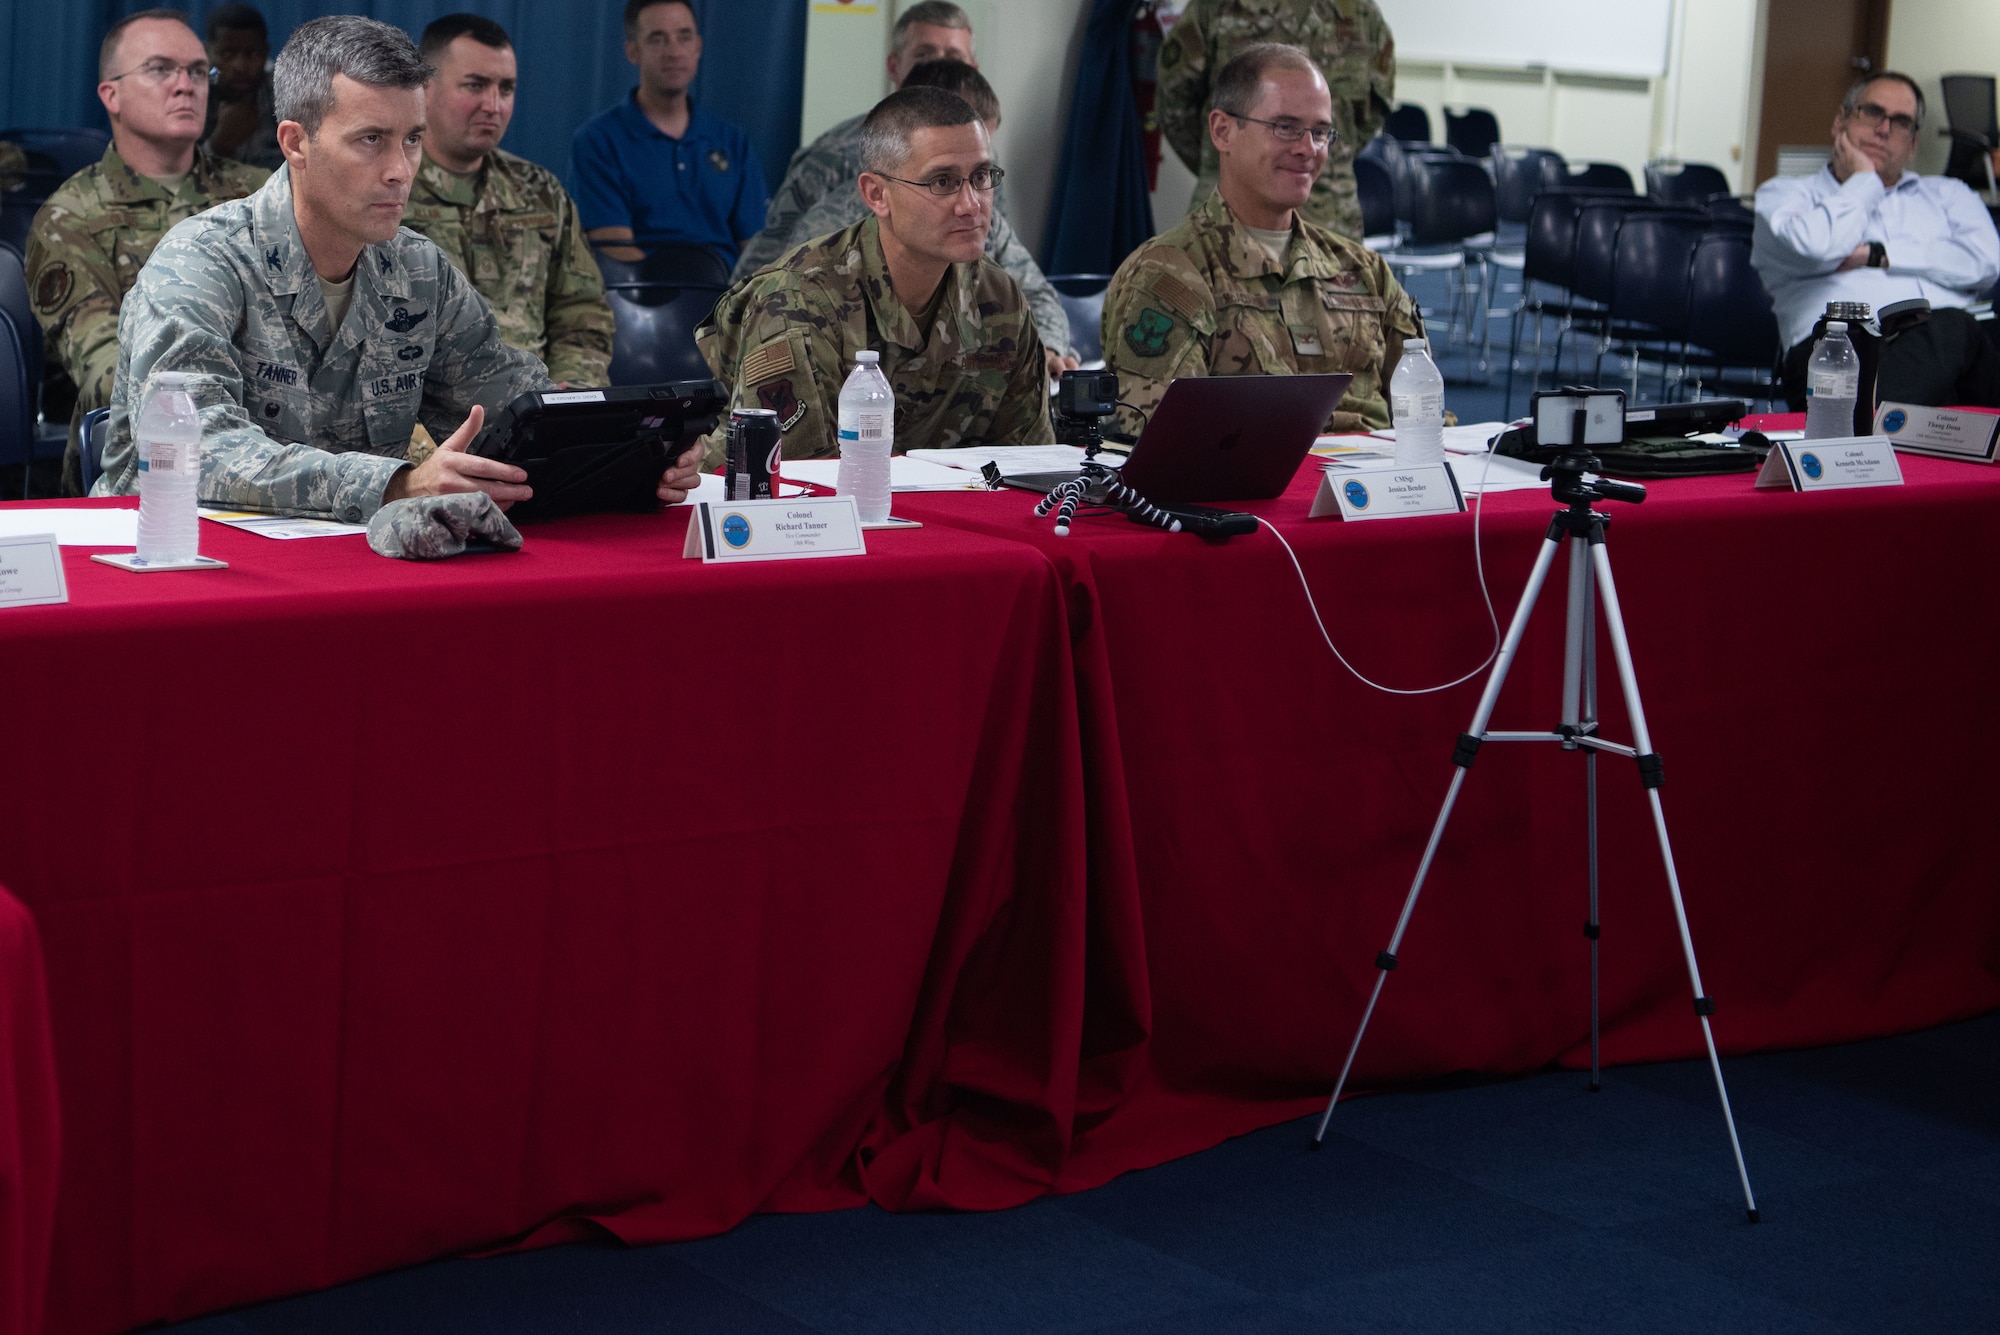 U.S. Air Force Col. Richard Tanner, 18th Wing vice commander, reviews spark tank submissions using the Valid Eval system May. 10, 2019, at Kadena Air Base, Japan.